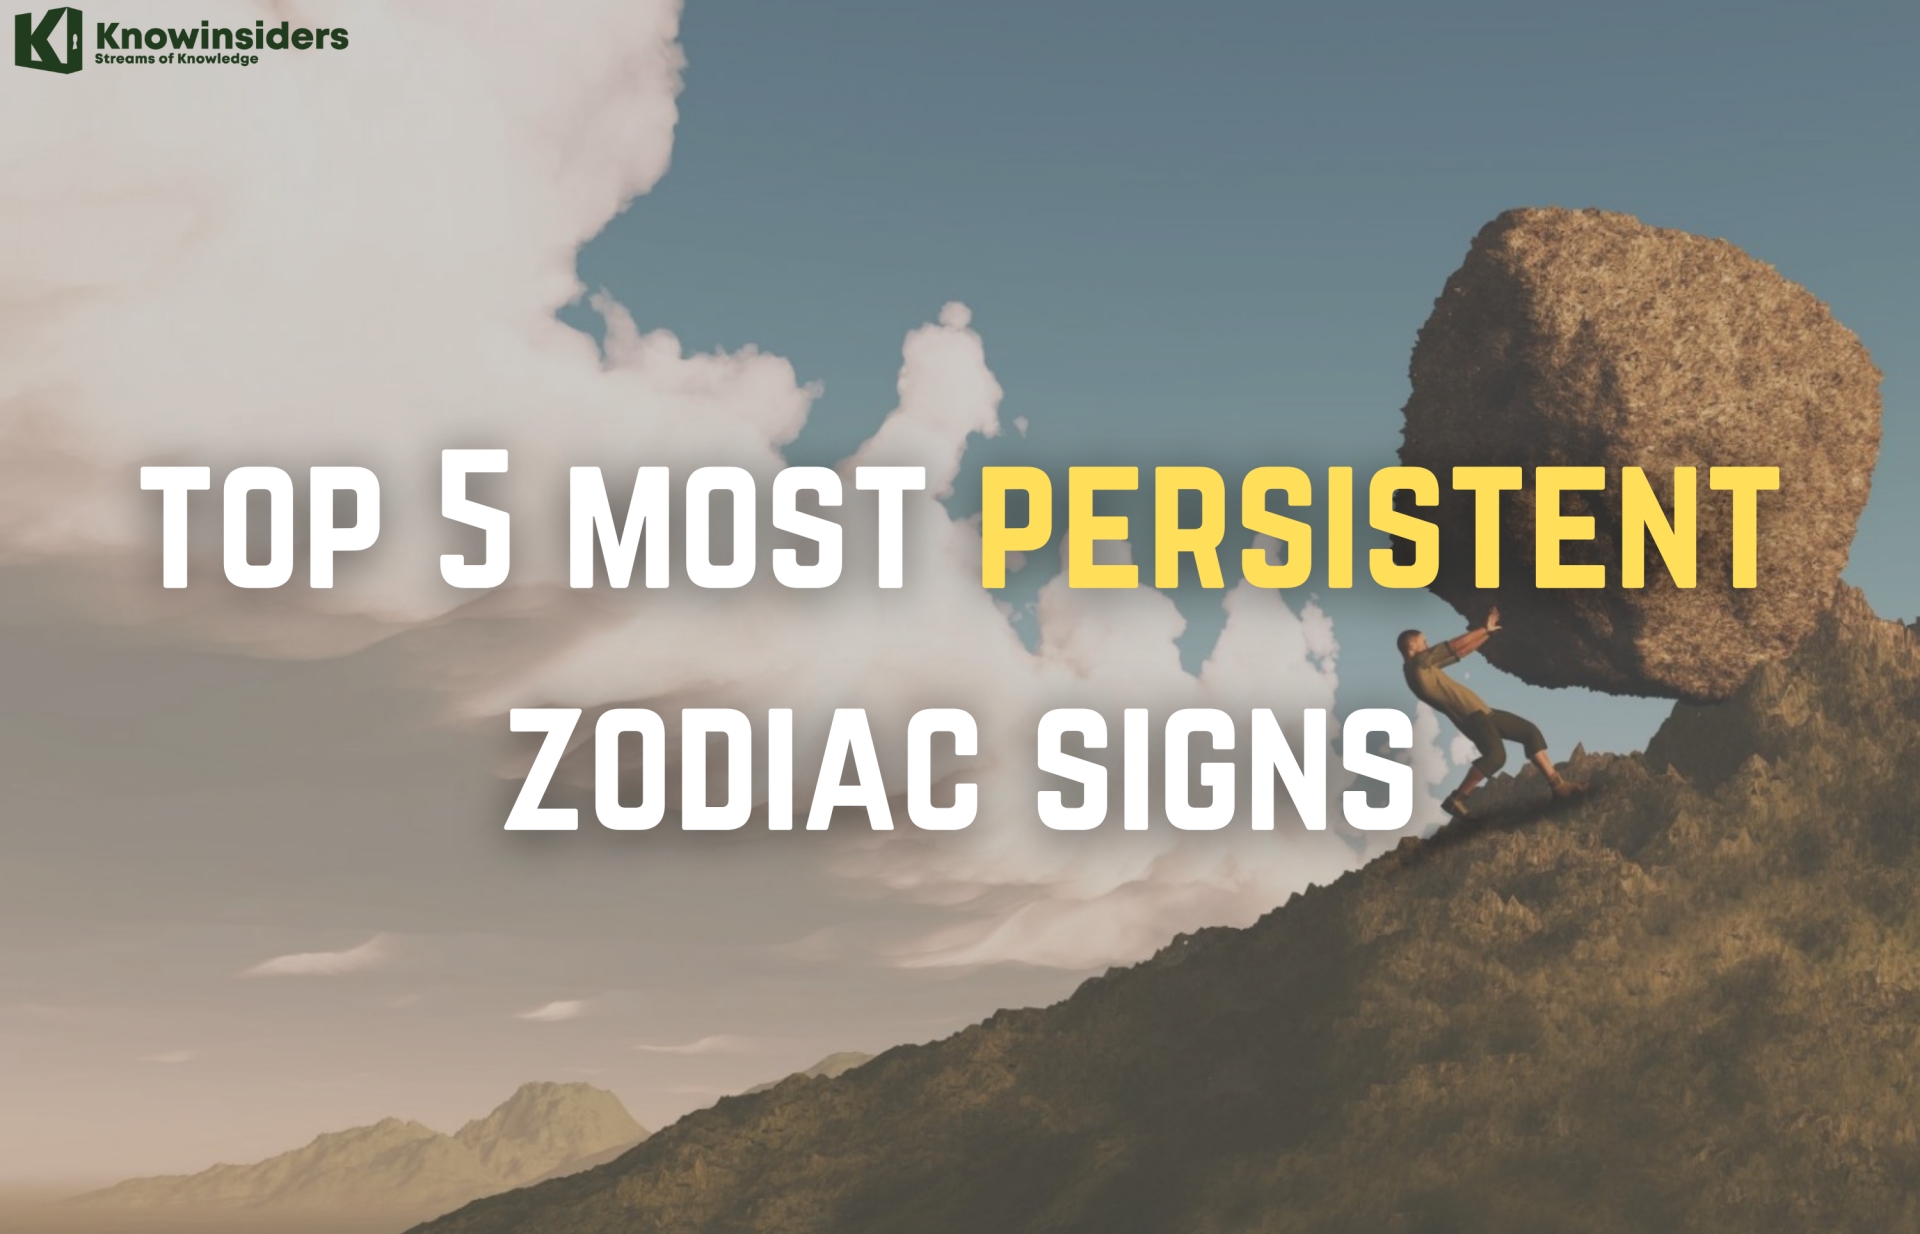 Top 5 Most Persistent Zodiac Signs, Earth Signs At The Top!